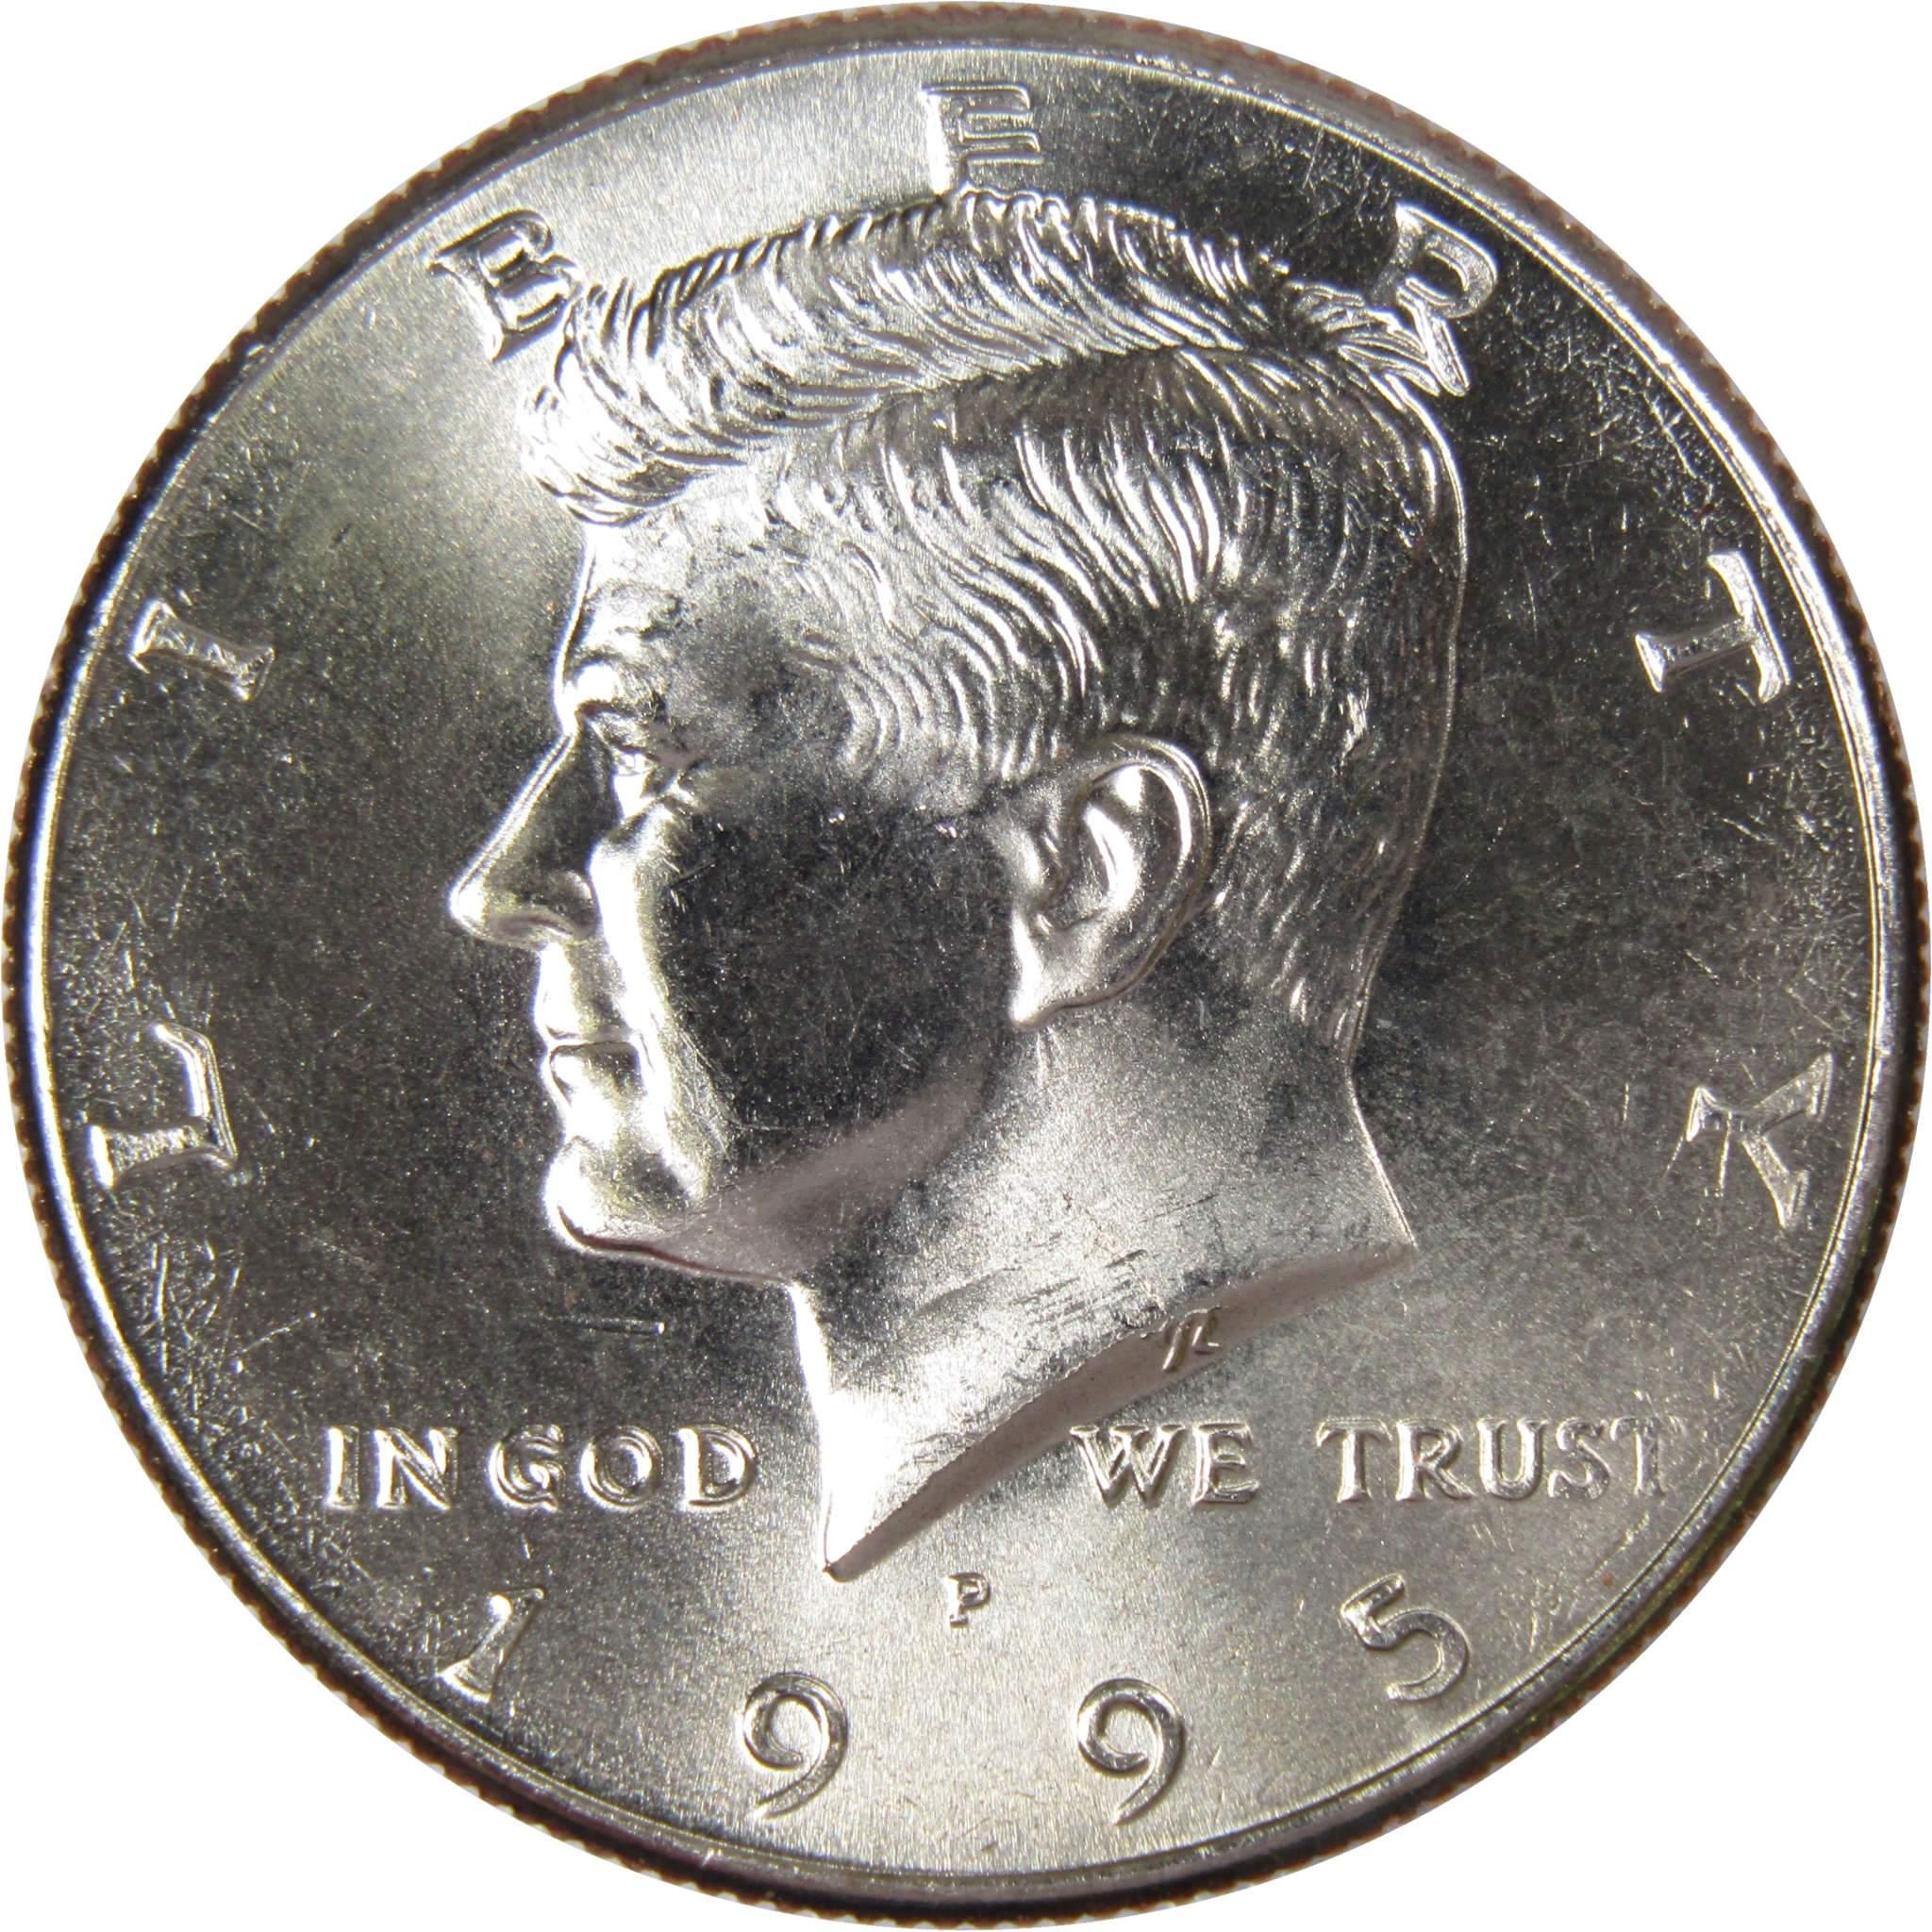 1995 P Kennedy Half Dollar BU Uncirculated Mint State 50c US Coin Collectible